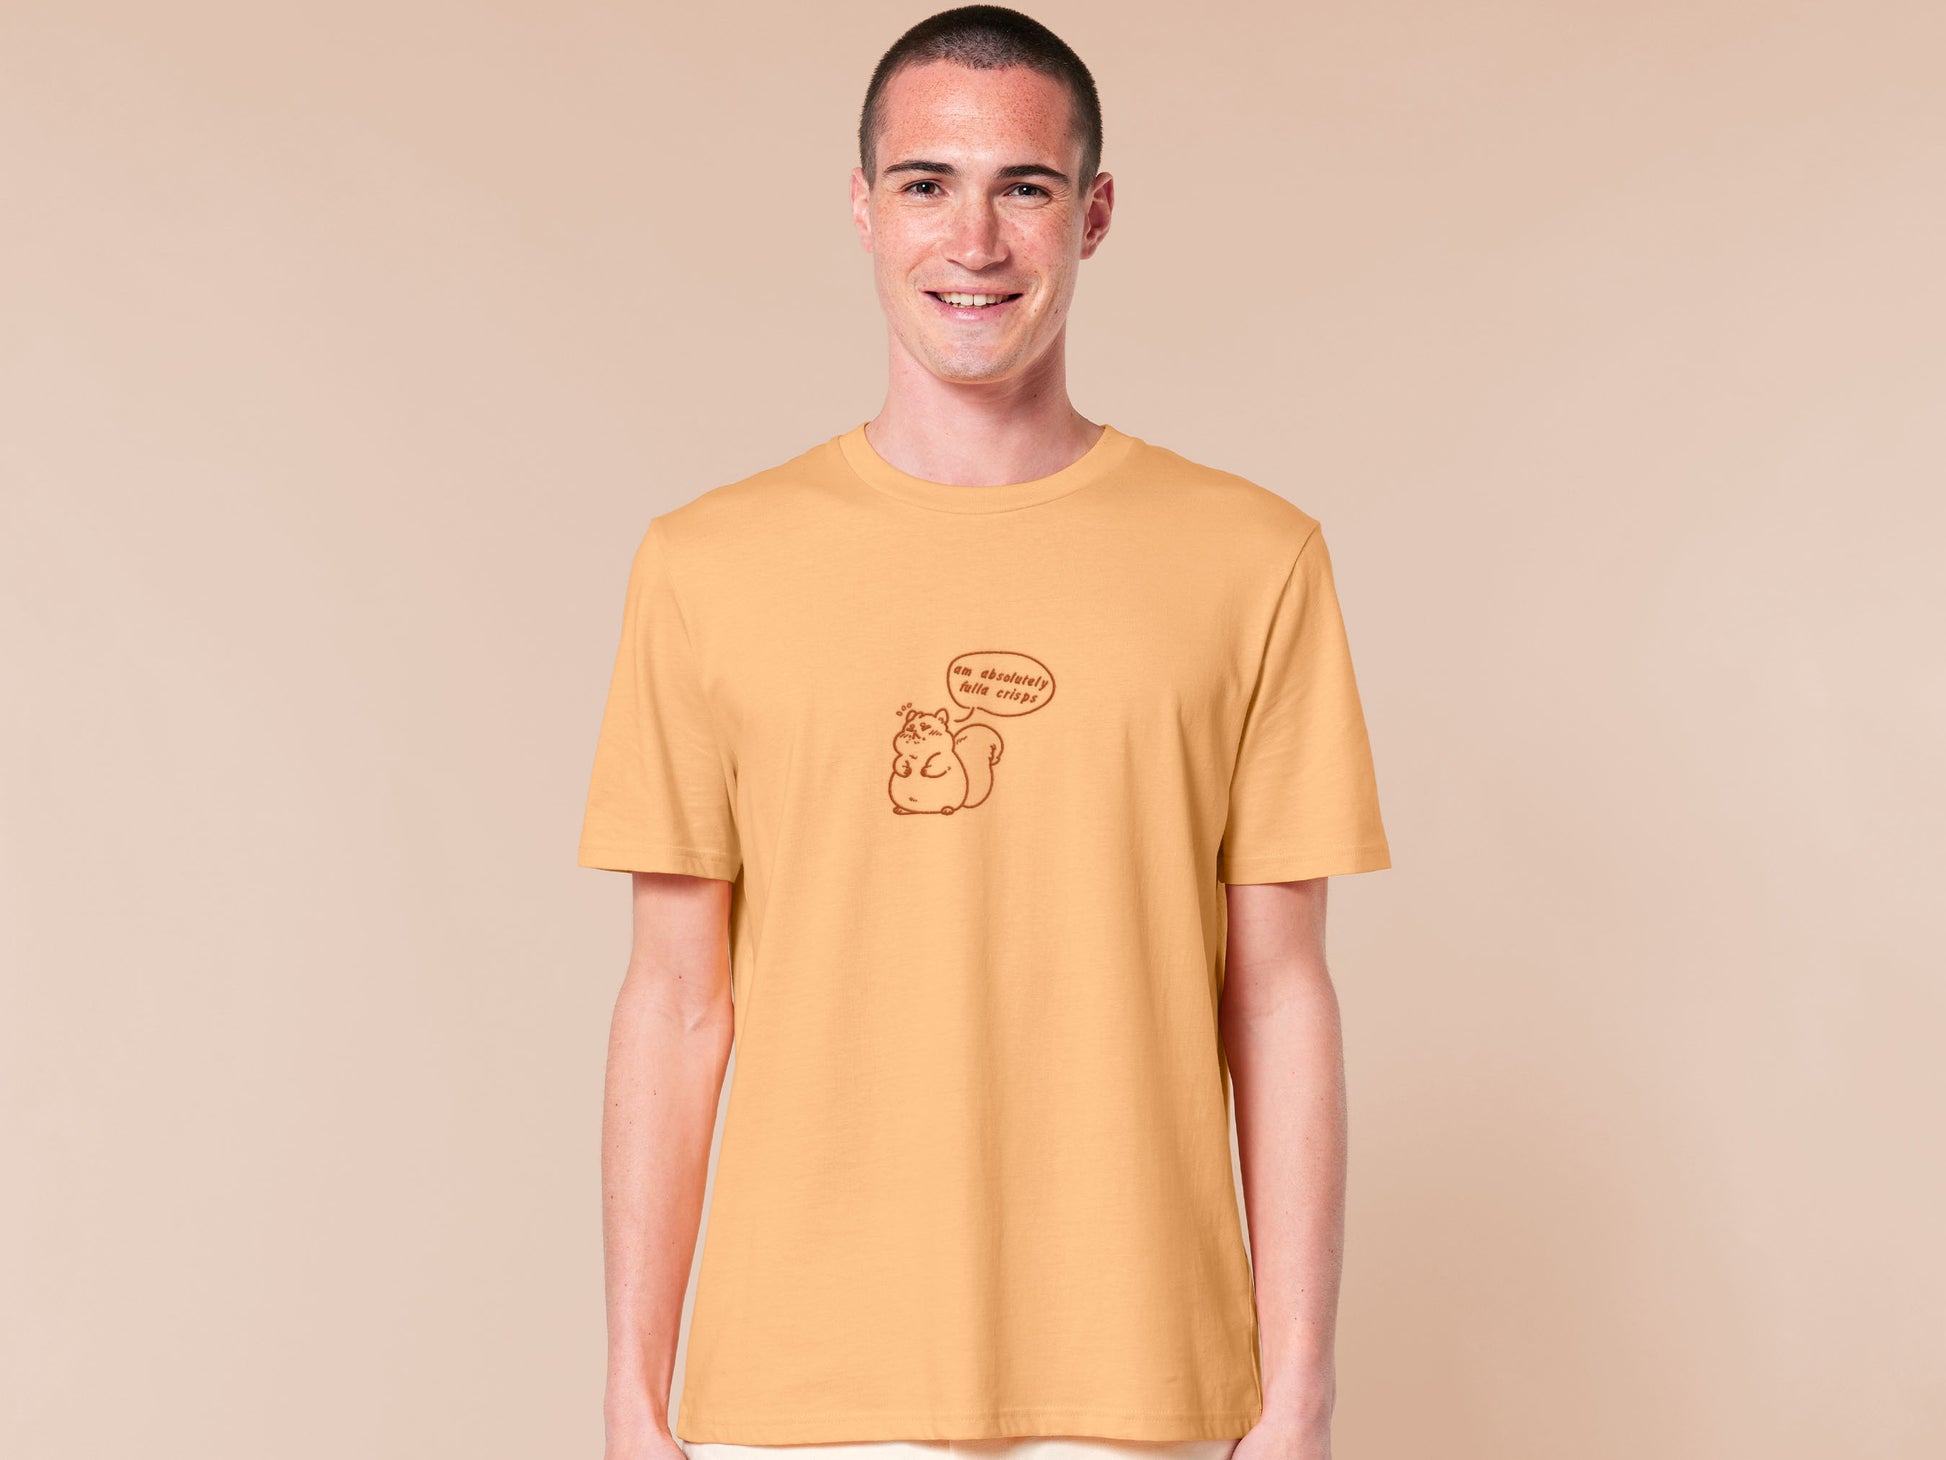 A man wearing a short sleeved yellow t-shirt with an embroidered design of a cute fat squirrel and a speech bubble with the text am absolutely fulla crisps